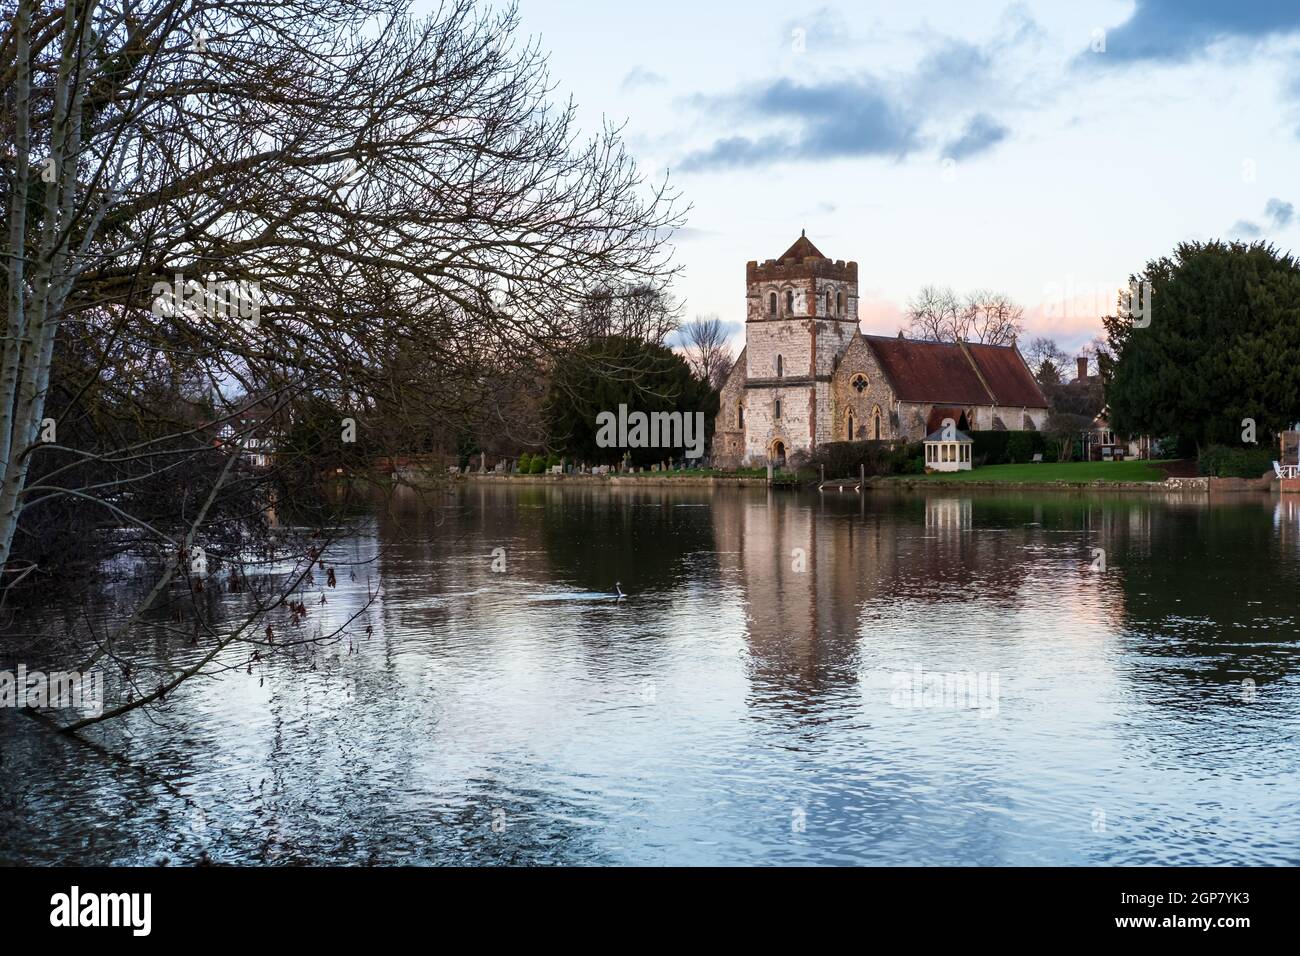 All Saints Church in Bisham, Berkshire, as seen from the River Thames at Marlow Stock Photo